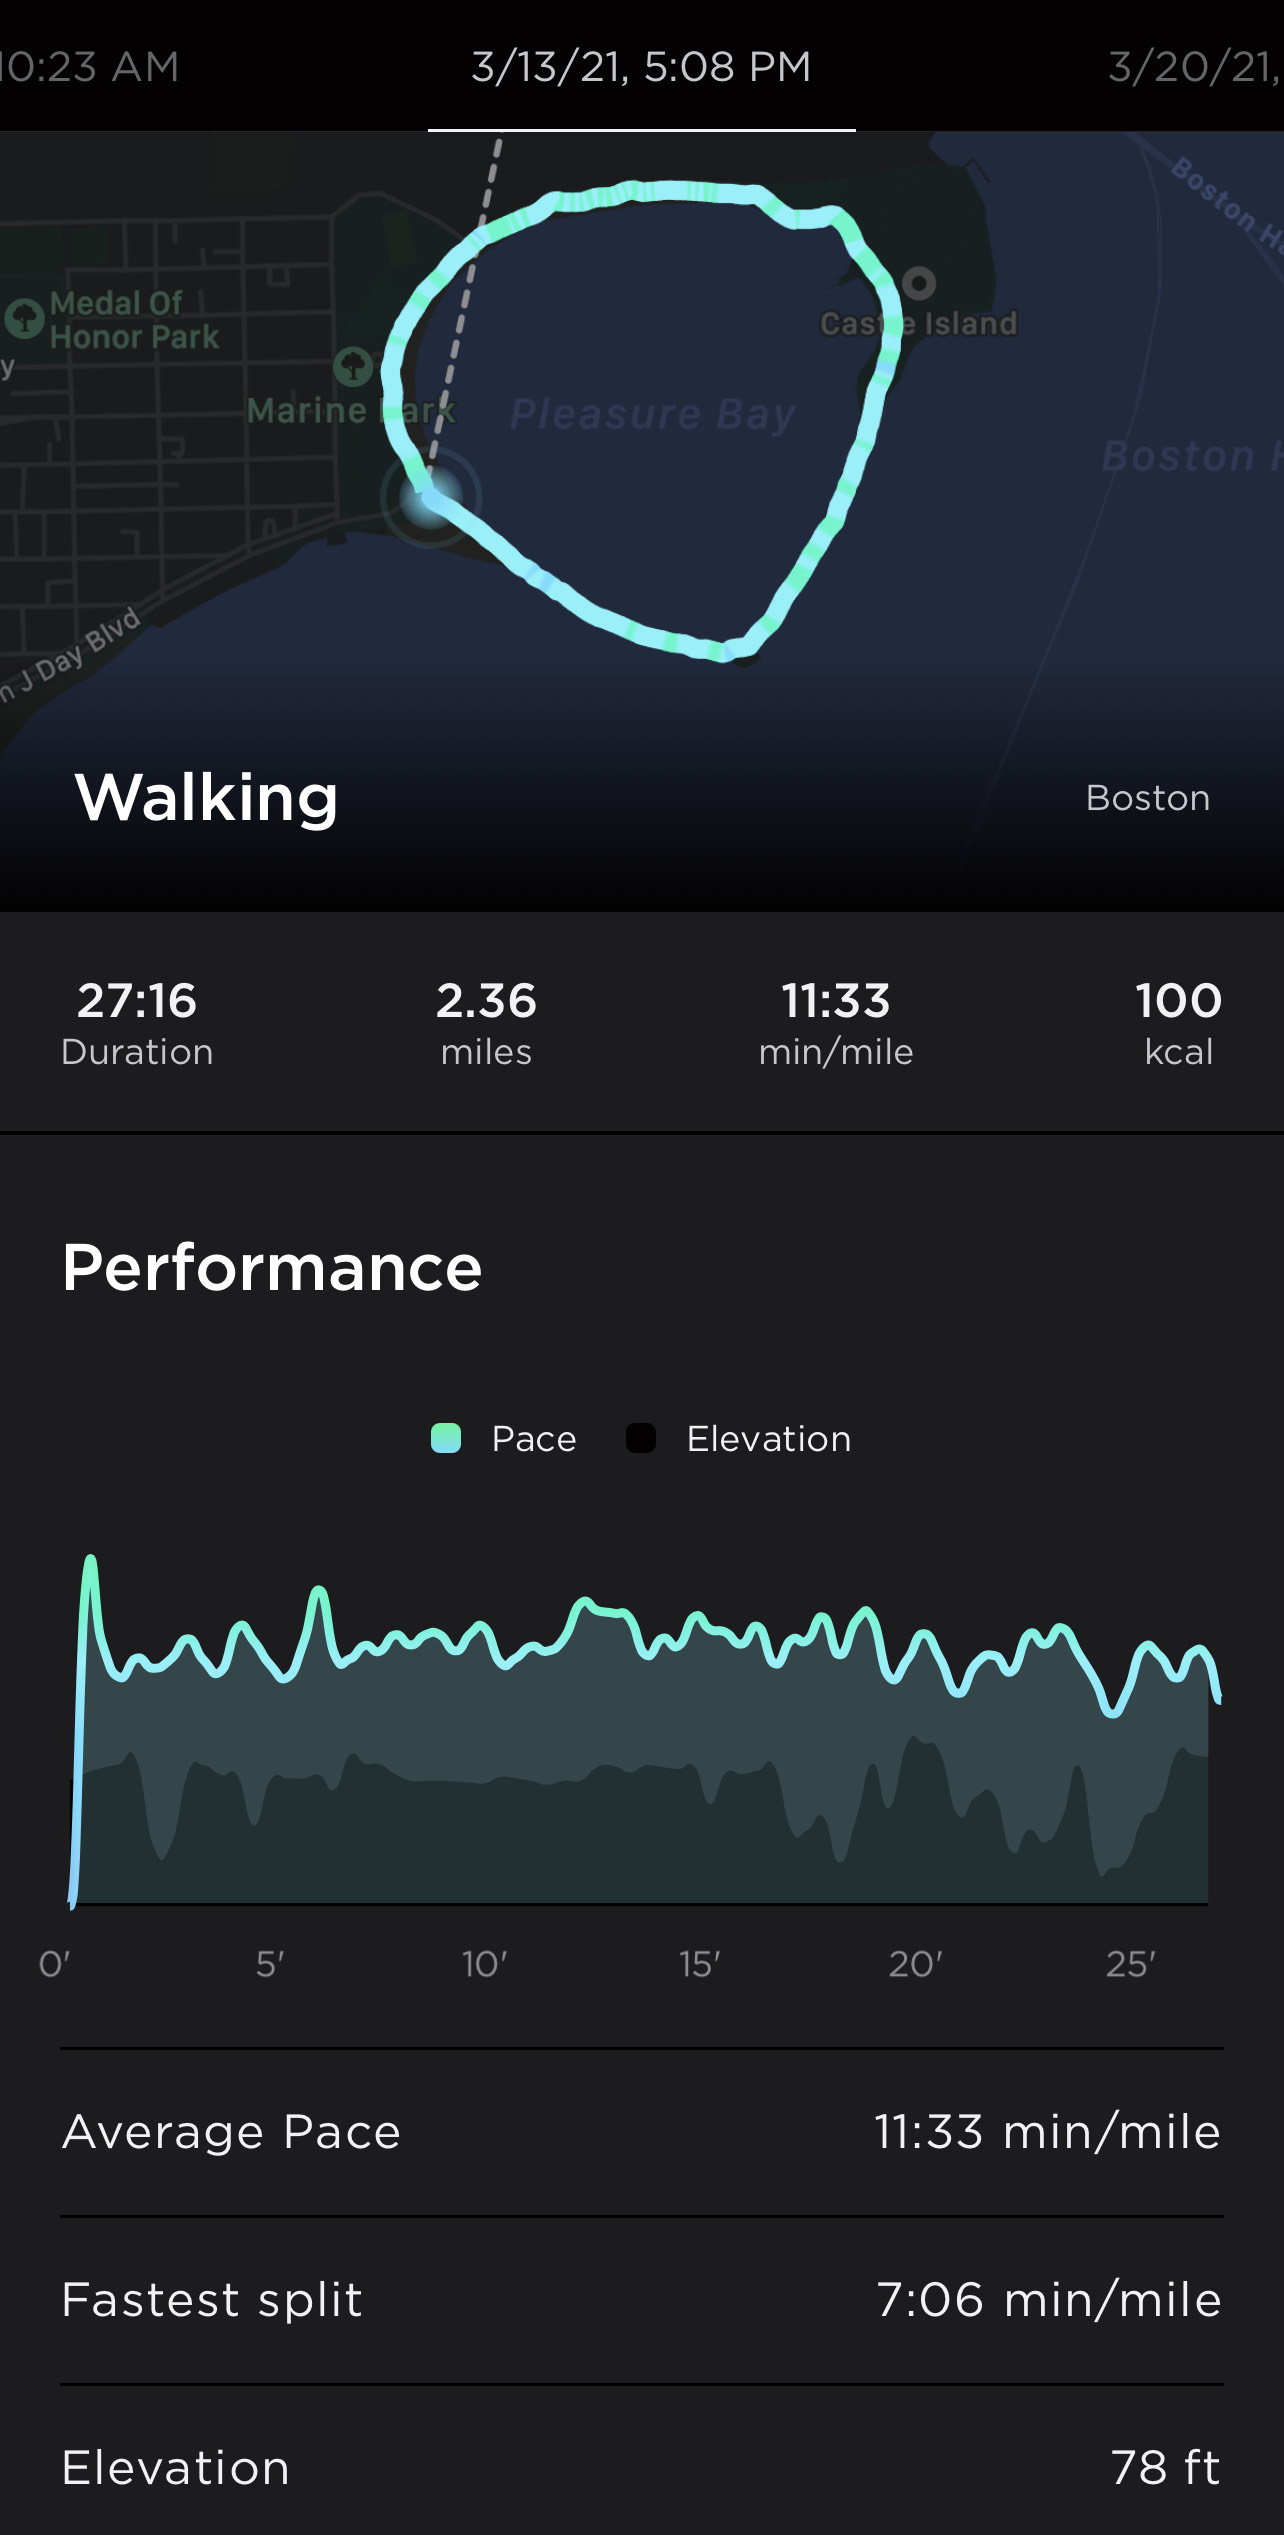 A 2.36 mile walk at Castle Island in Boston, MA tracked with ScanWatch